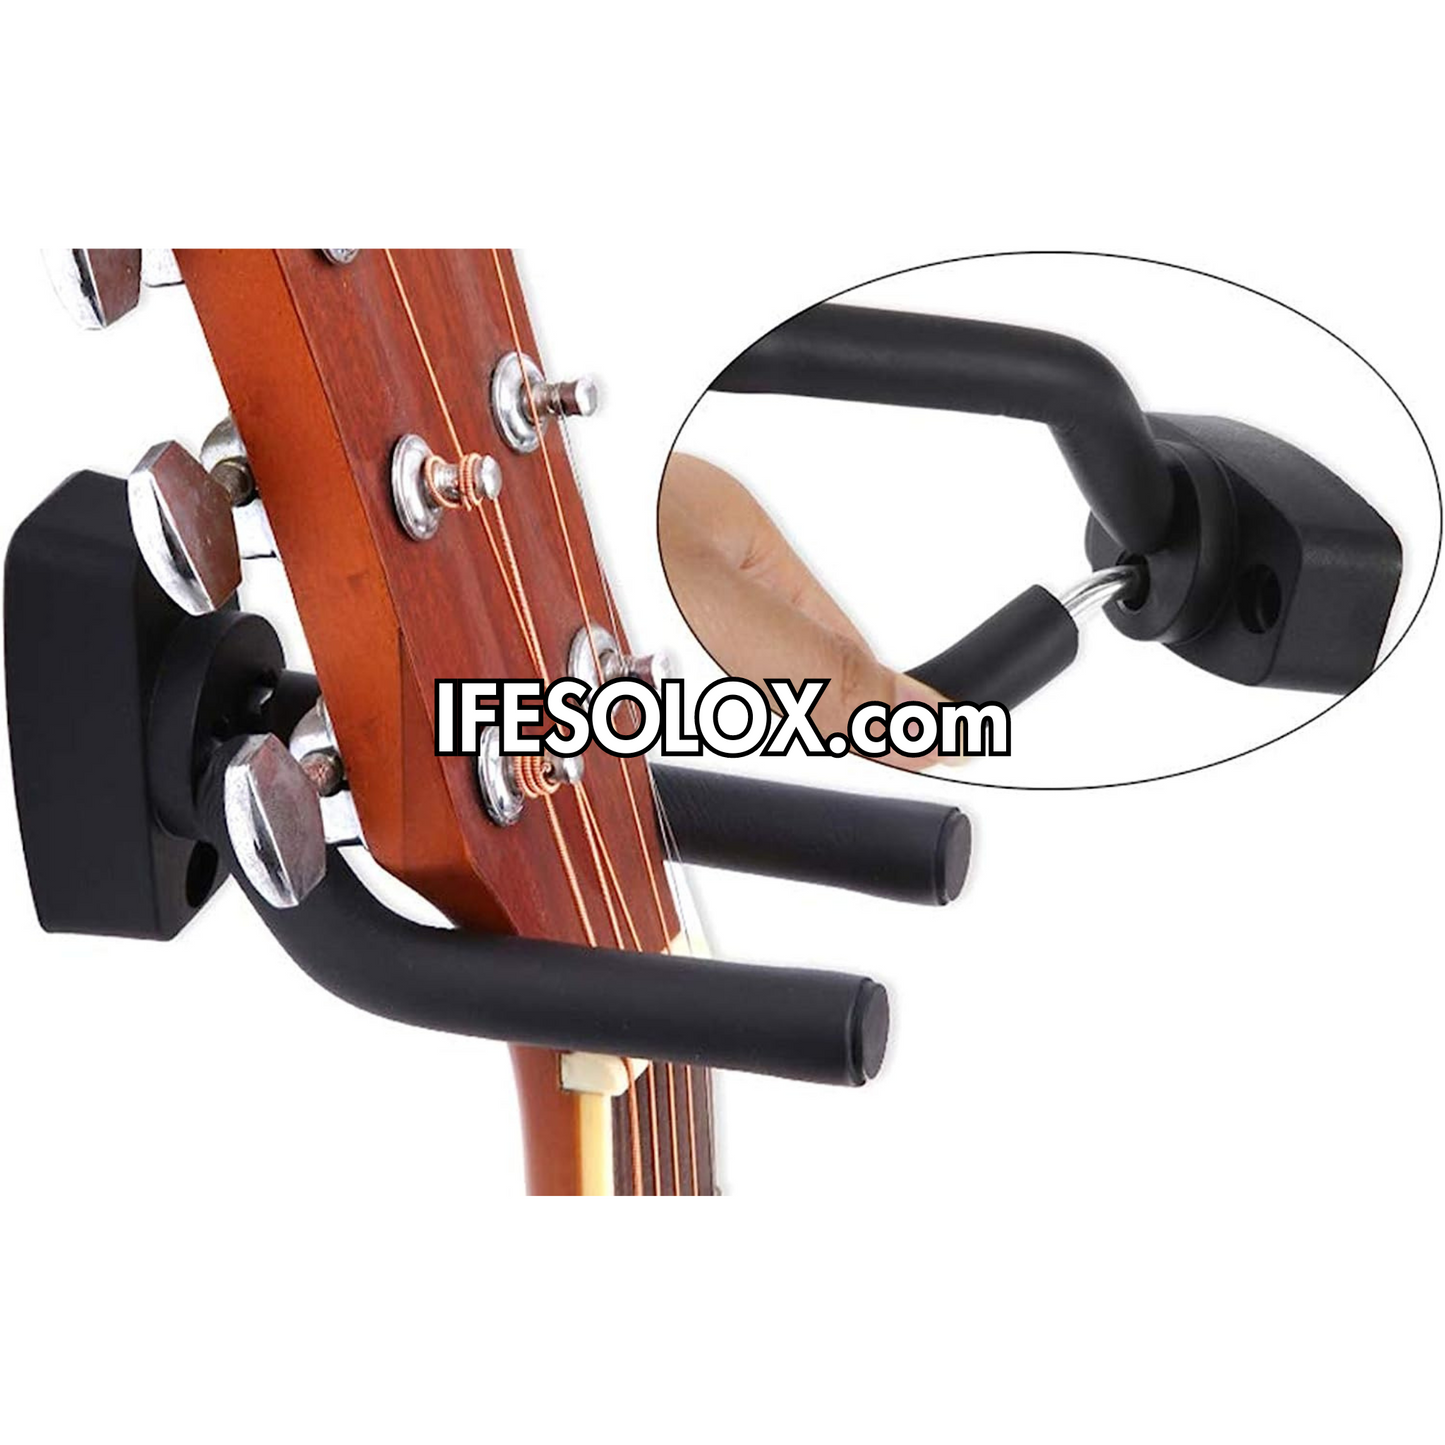 SLX Single Wall Mount Guitar Stand for Acoustic, Bass and Electric Guitars - Brand New